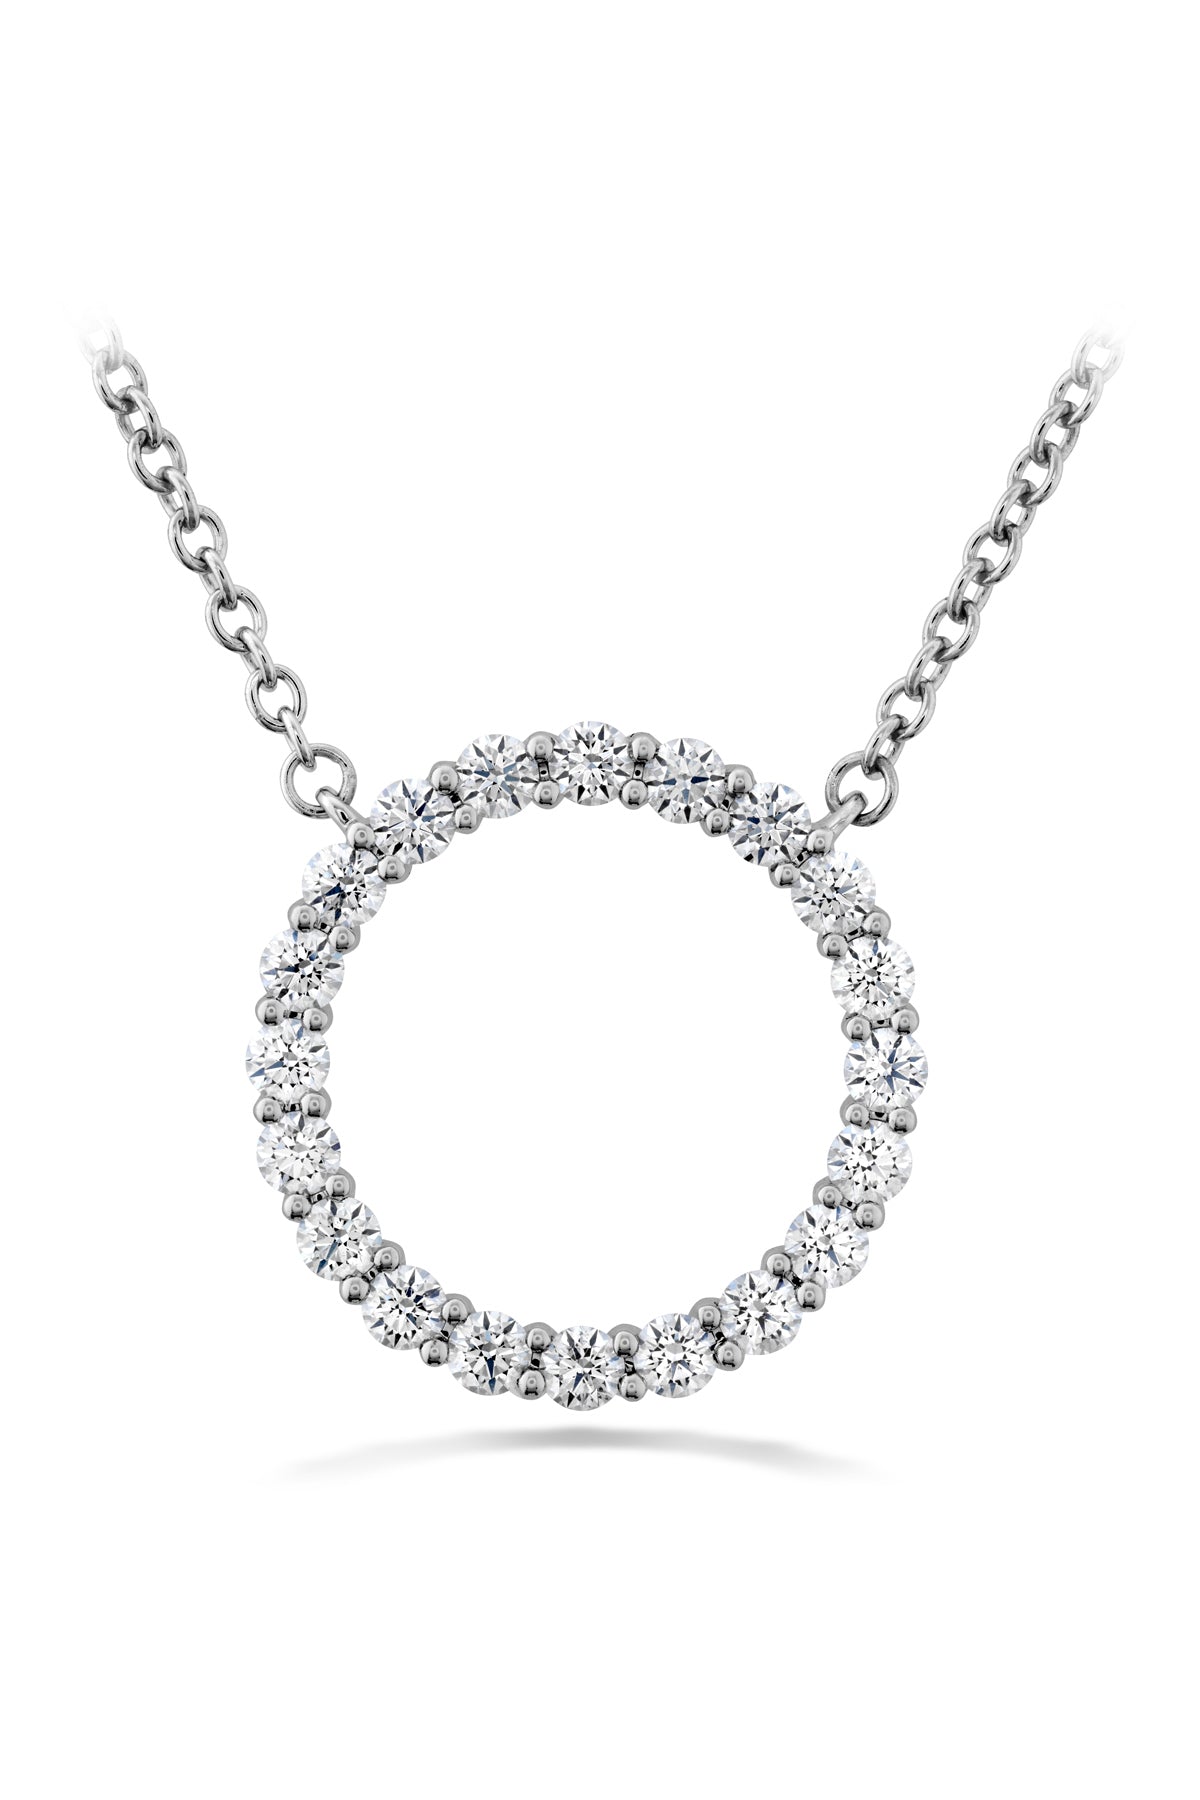 Medium Signature Circle Pendant From Hearts On FireFrom Hearts On Fire available at LeGassick Diamonds and Jewellery Gold Coast, Australia.